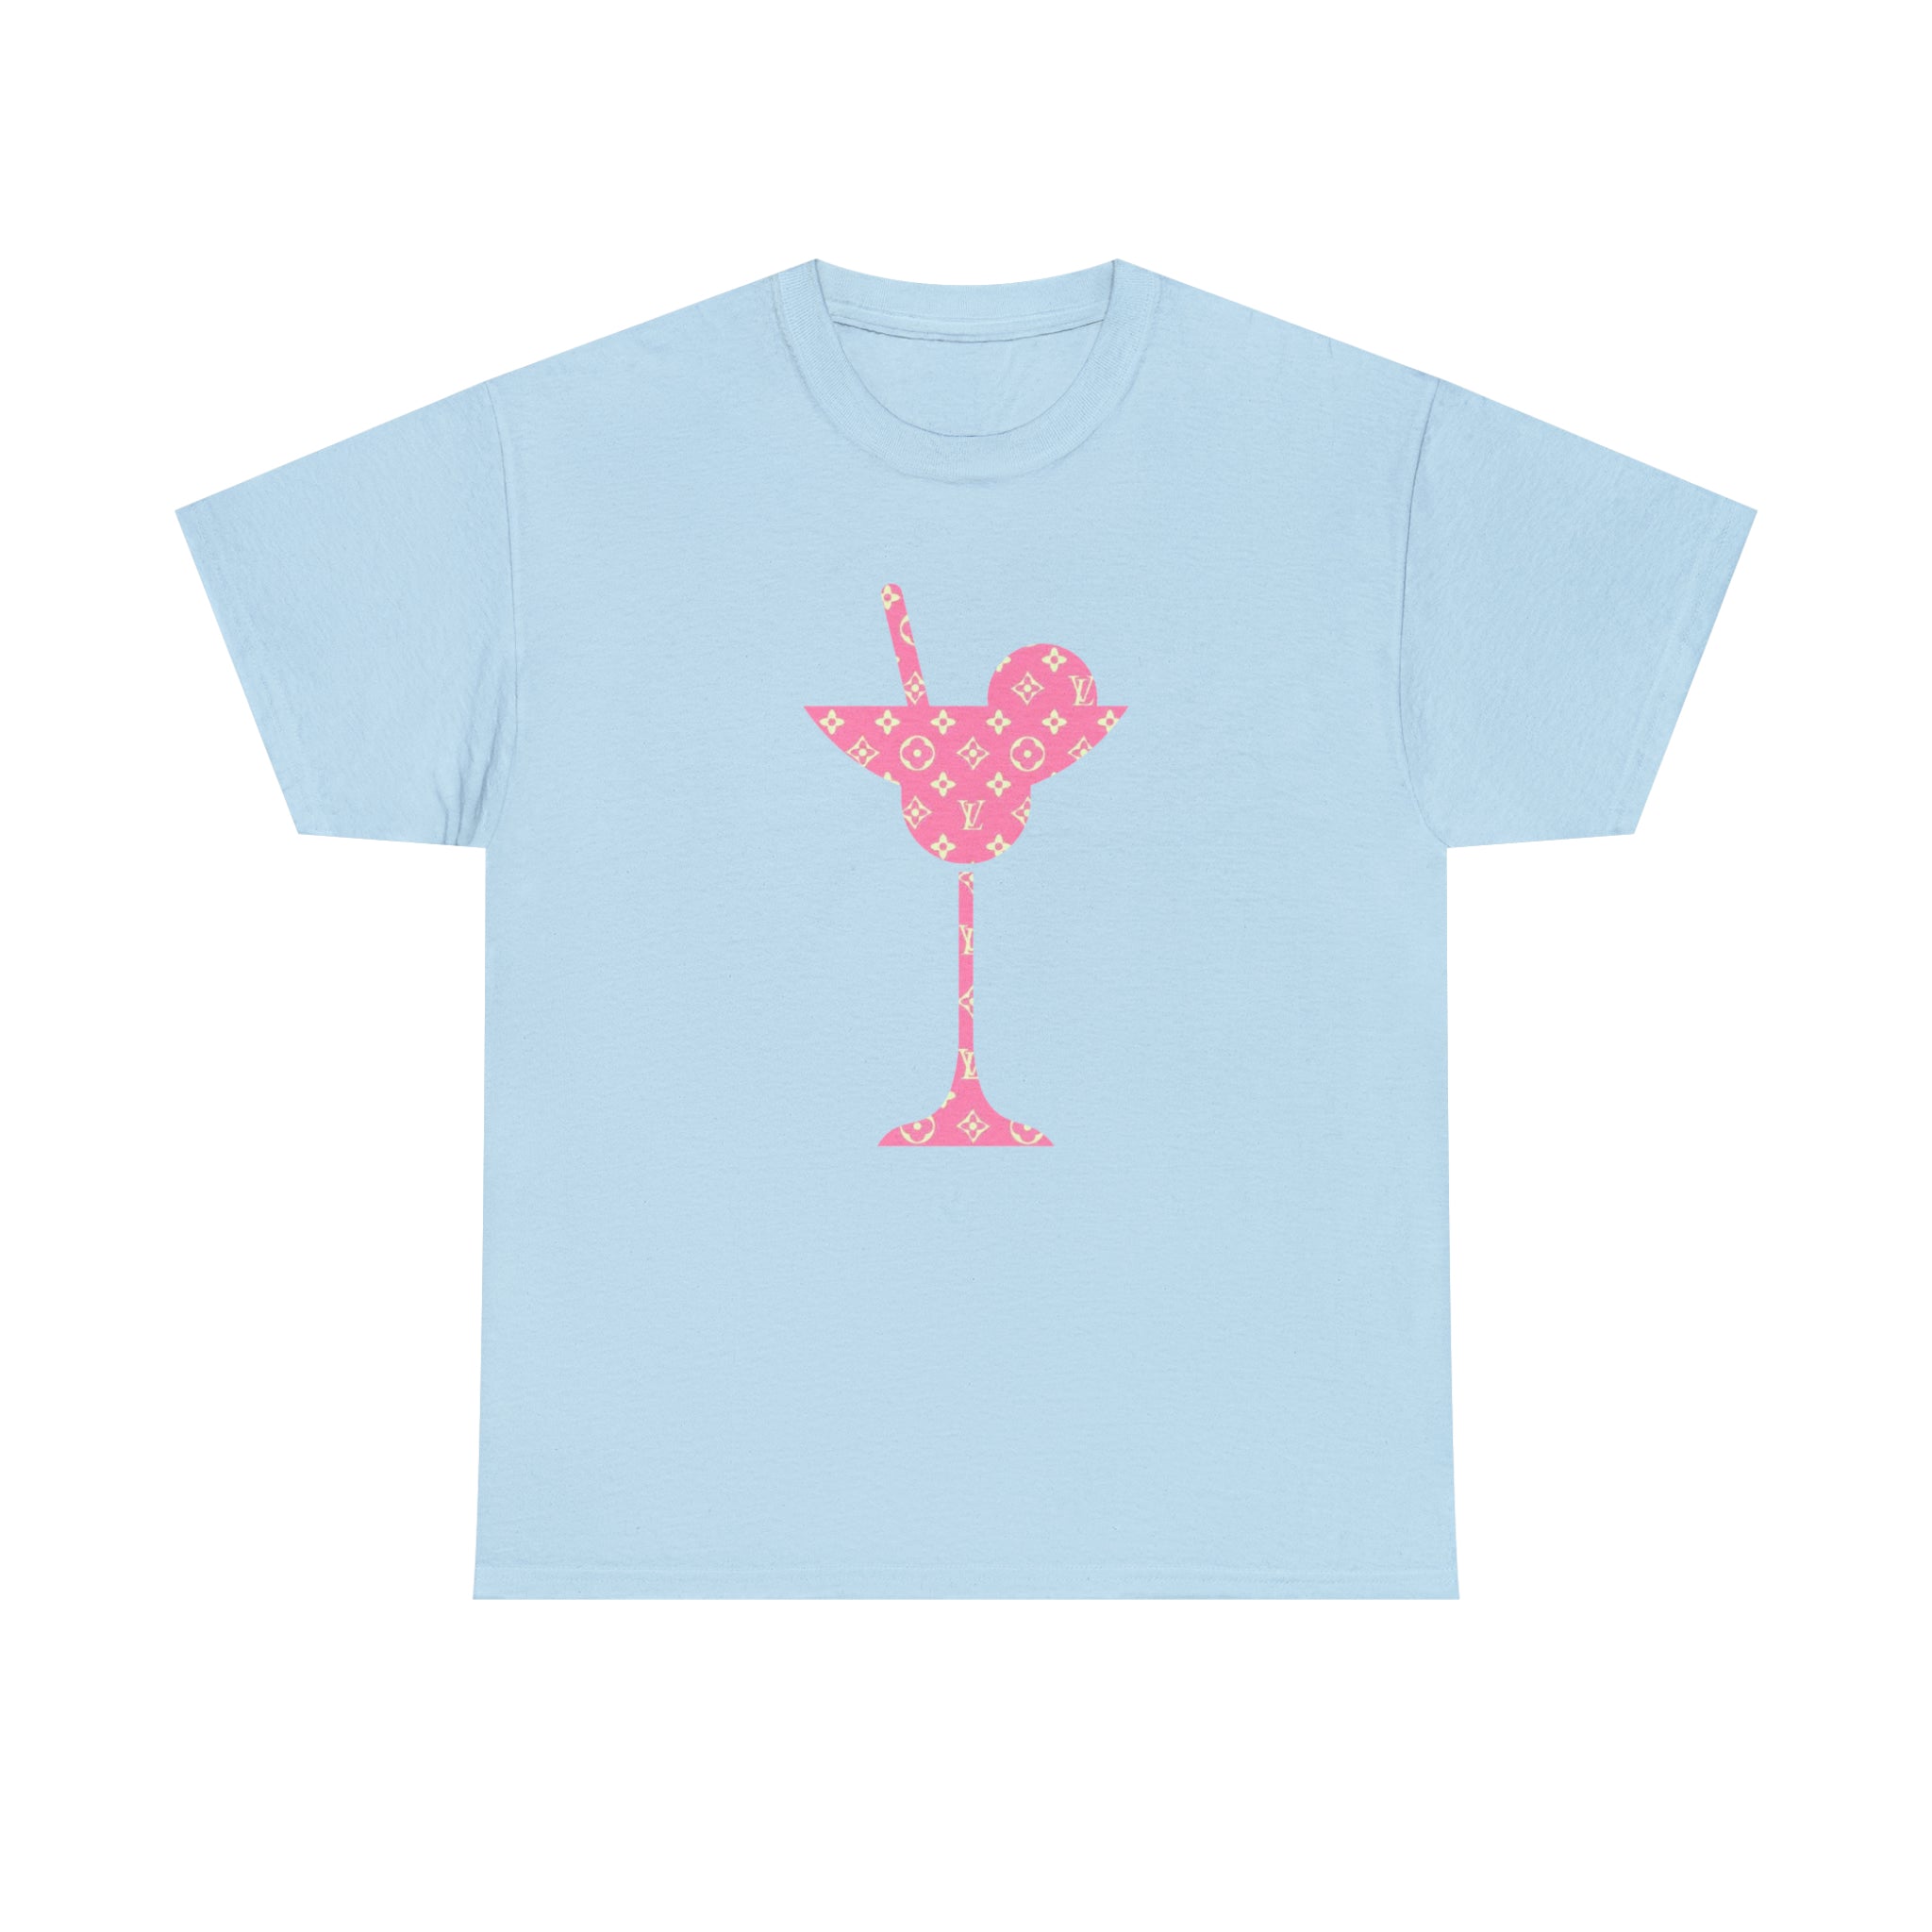  Abby Pattern in Pink and Beige Martini Glass Unisex Relaxed Fit Heavy Cotton Tee, Graphic Loose Fit Tshirt T-ShirtLightBlue5XL